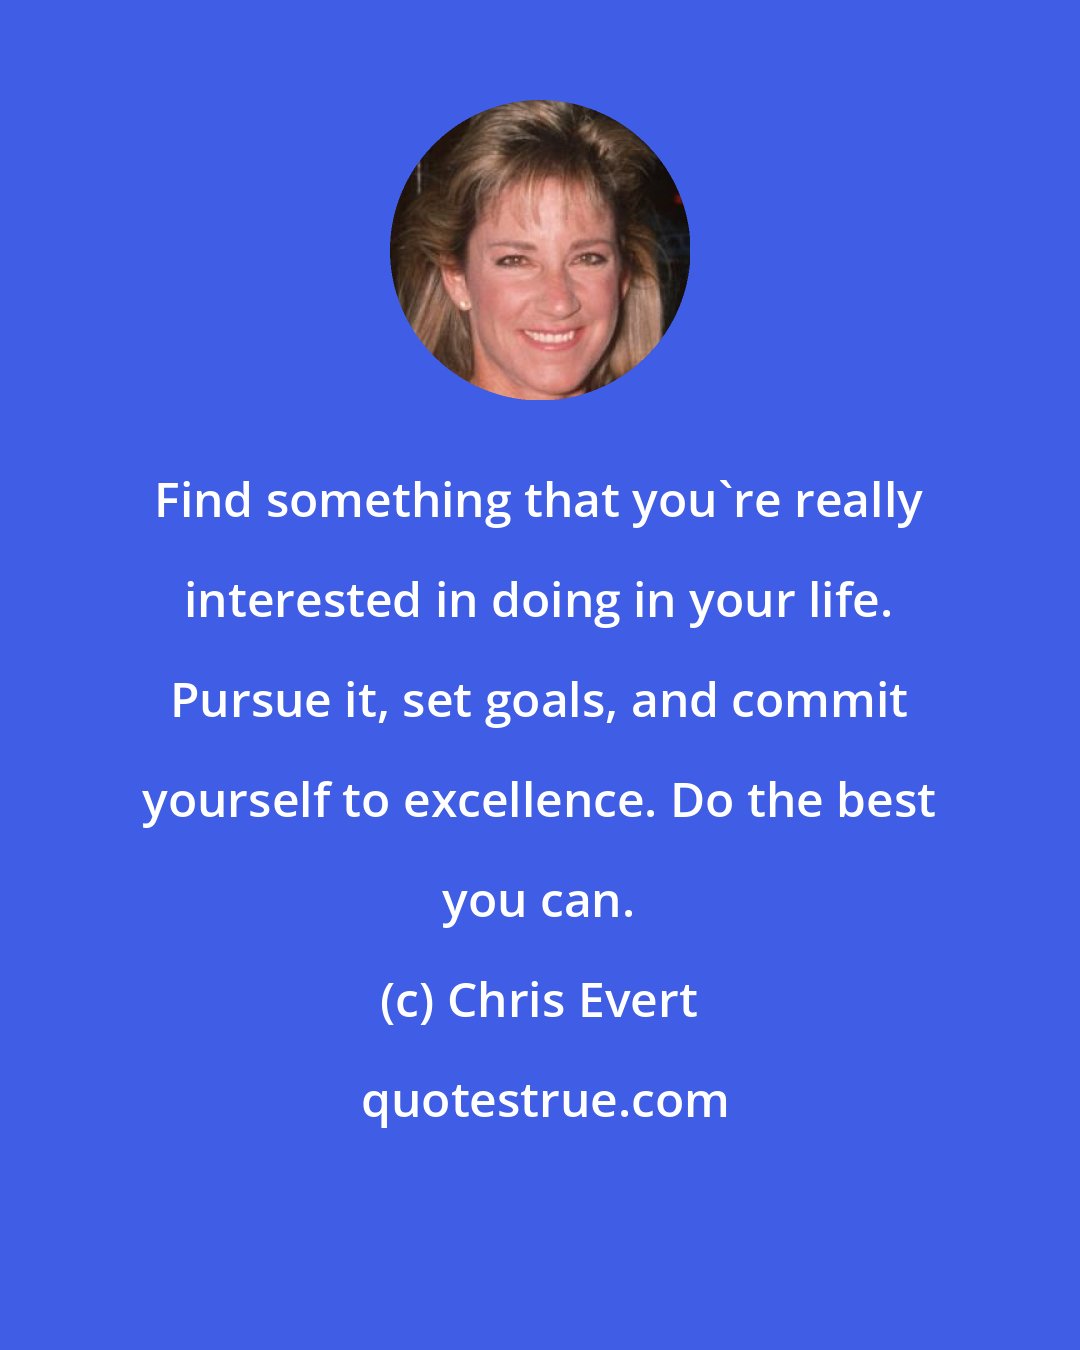 Chris Evert: Find something that you're really interested in doing in your life. Pursue it, set goals, and commit yourself to excellence. Do the best you can.